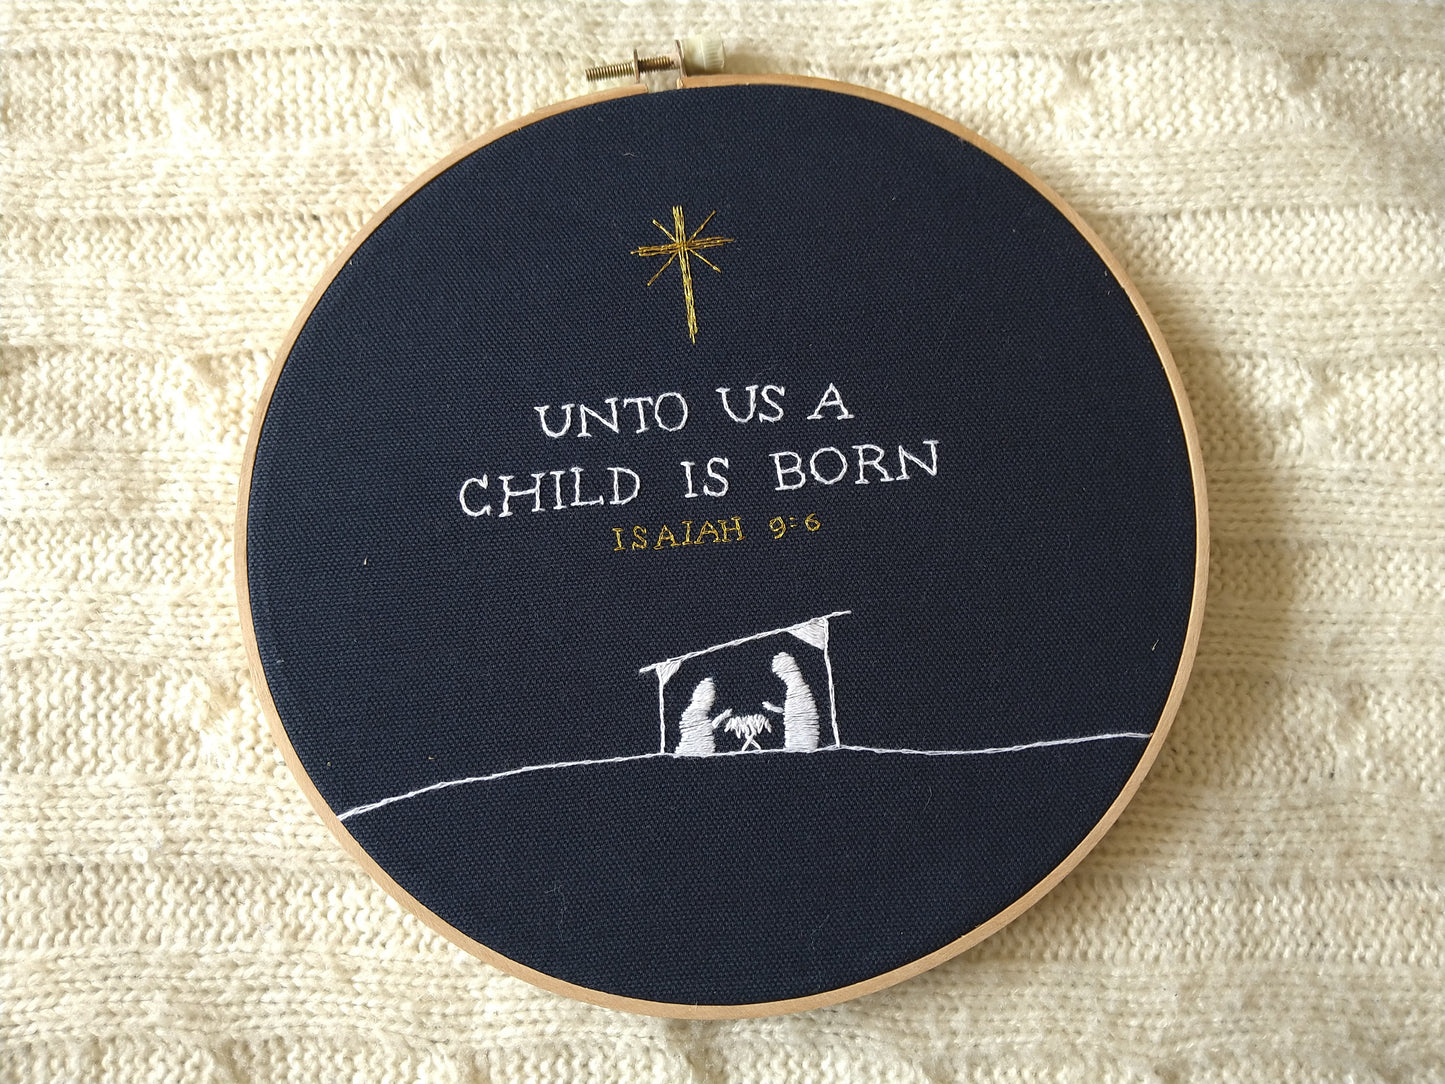 A Child is Born Embroidery Hoop